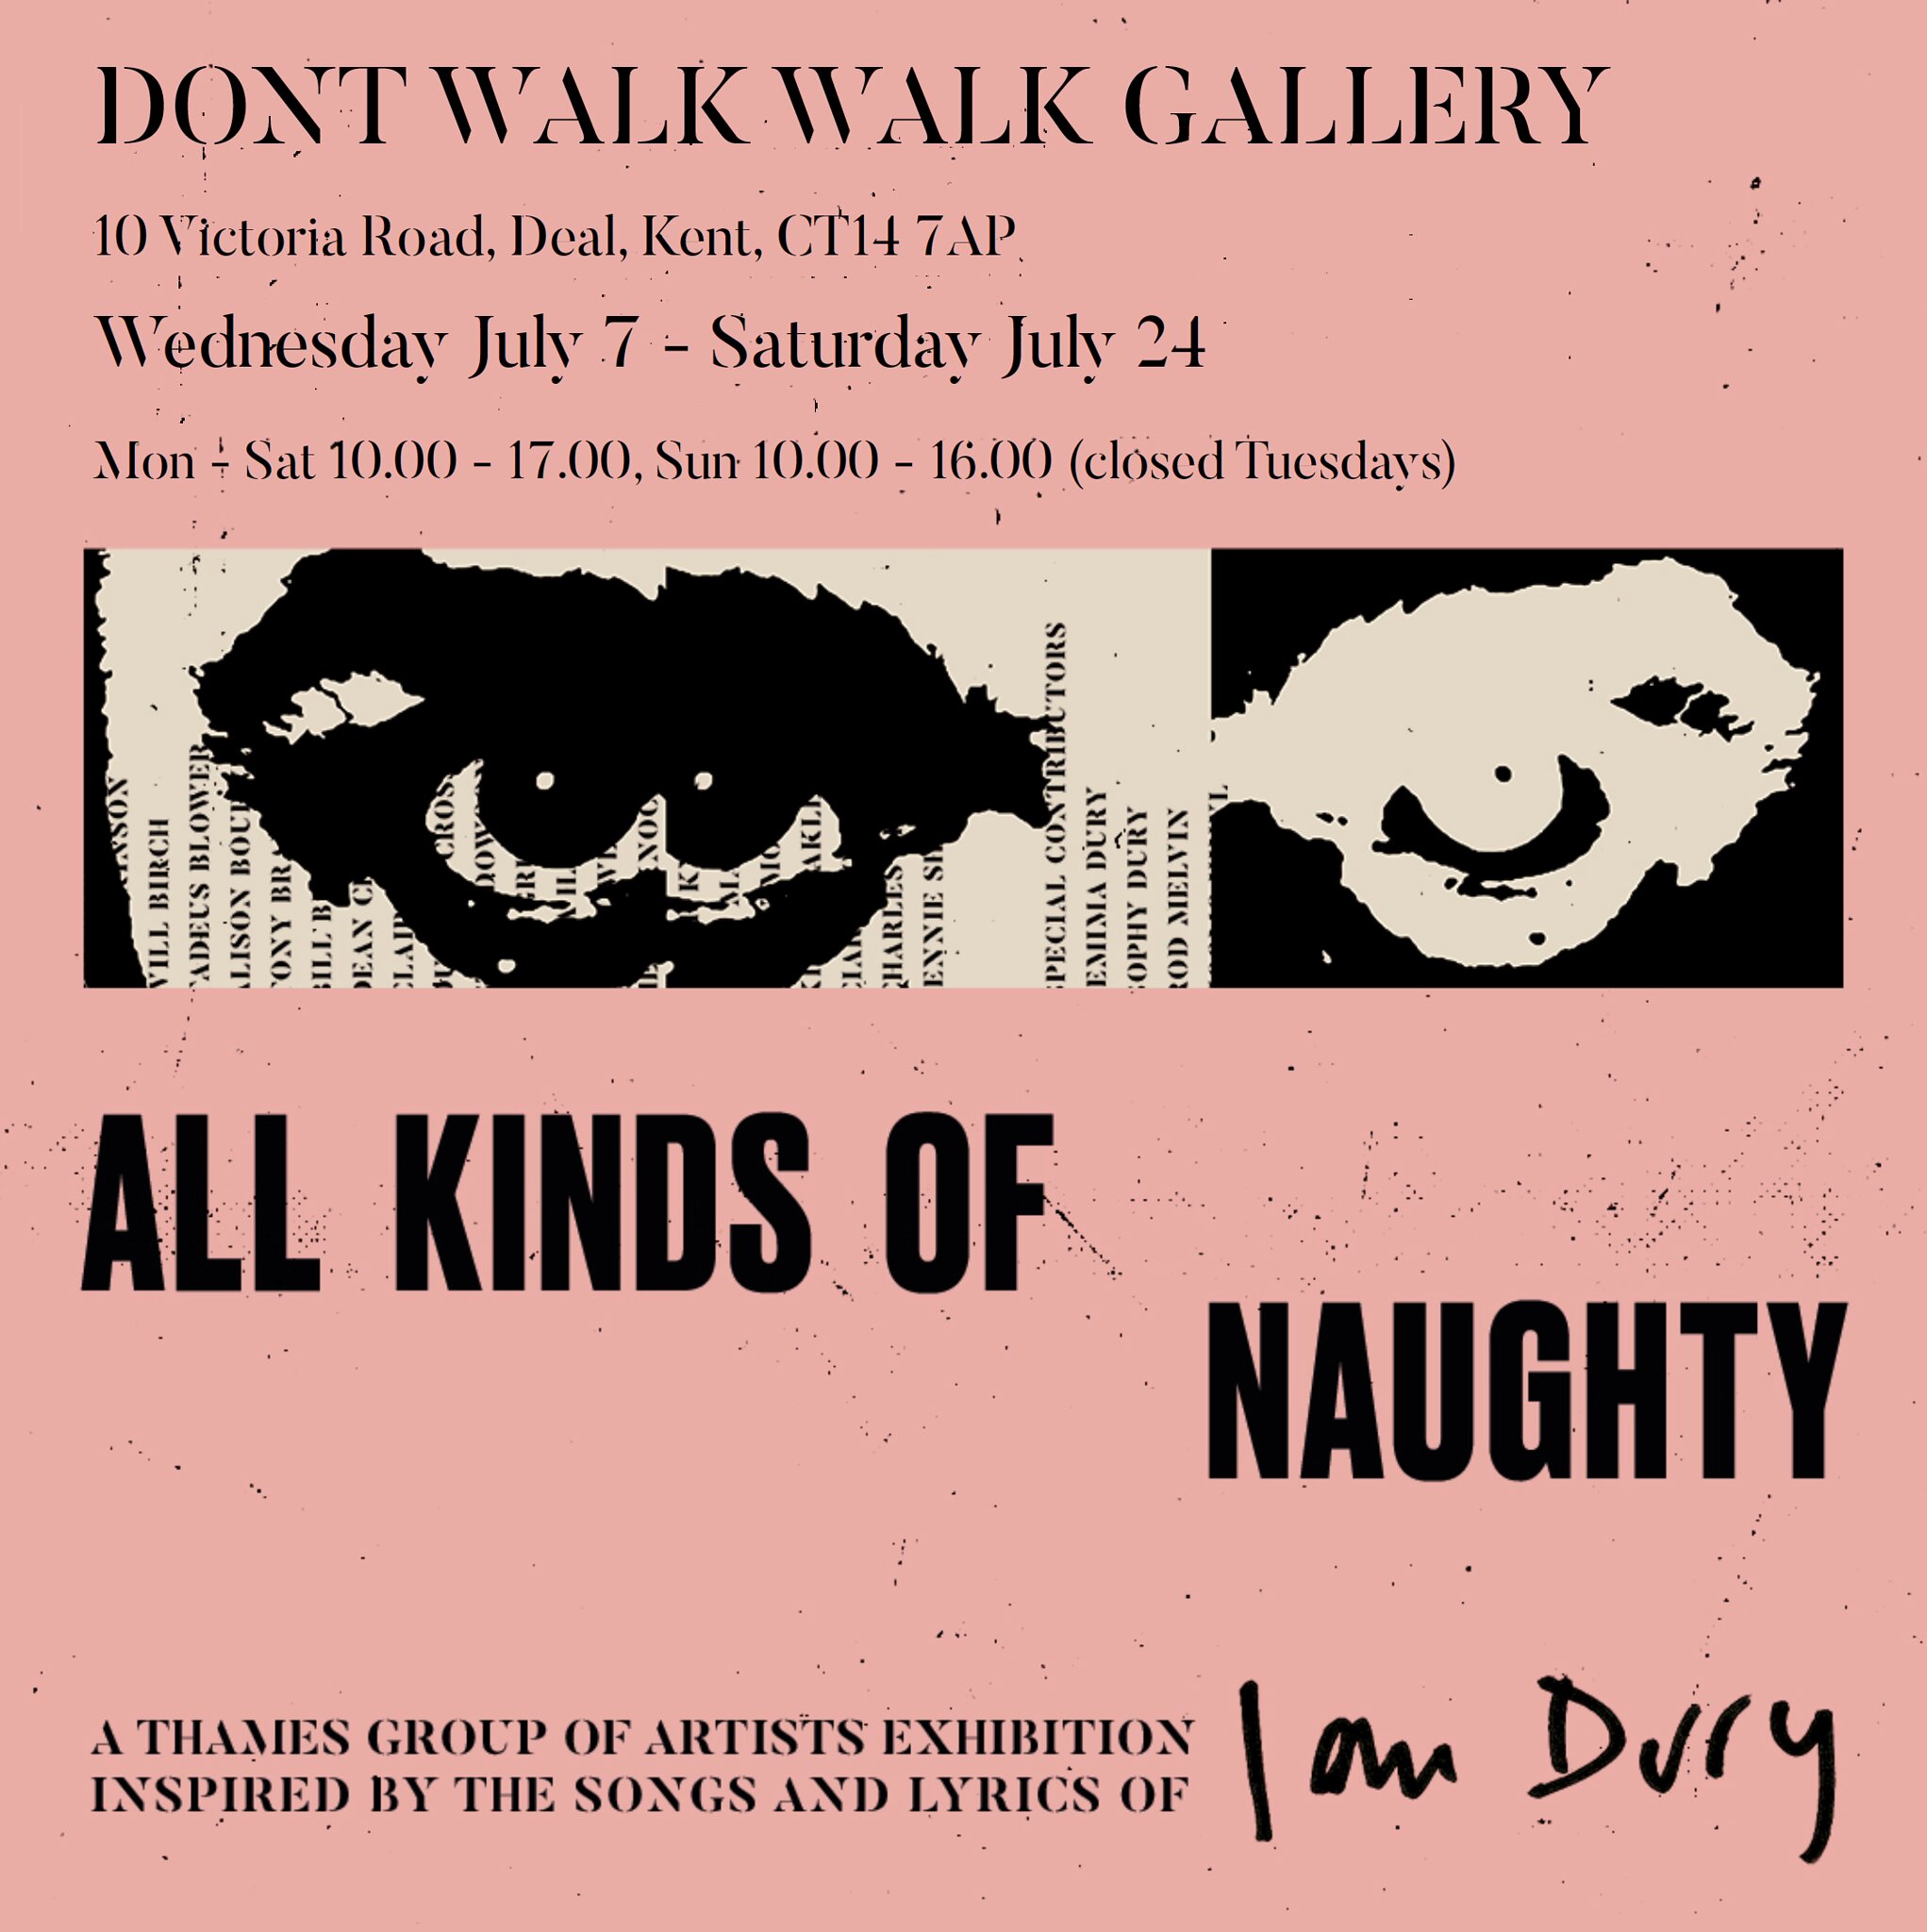 All Kinds Of Naughty: Don't Walk Walk